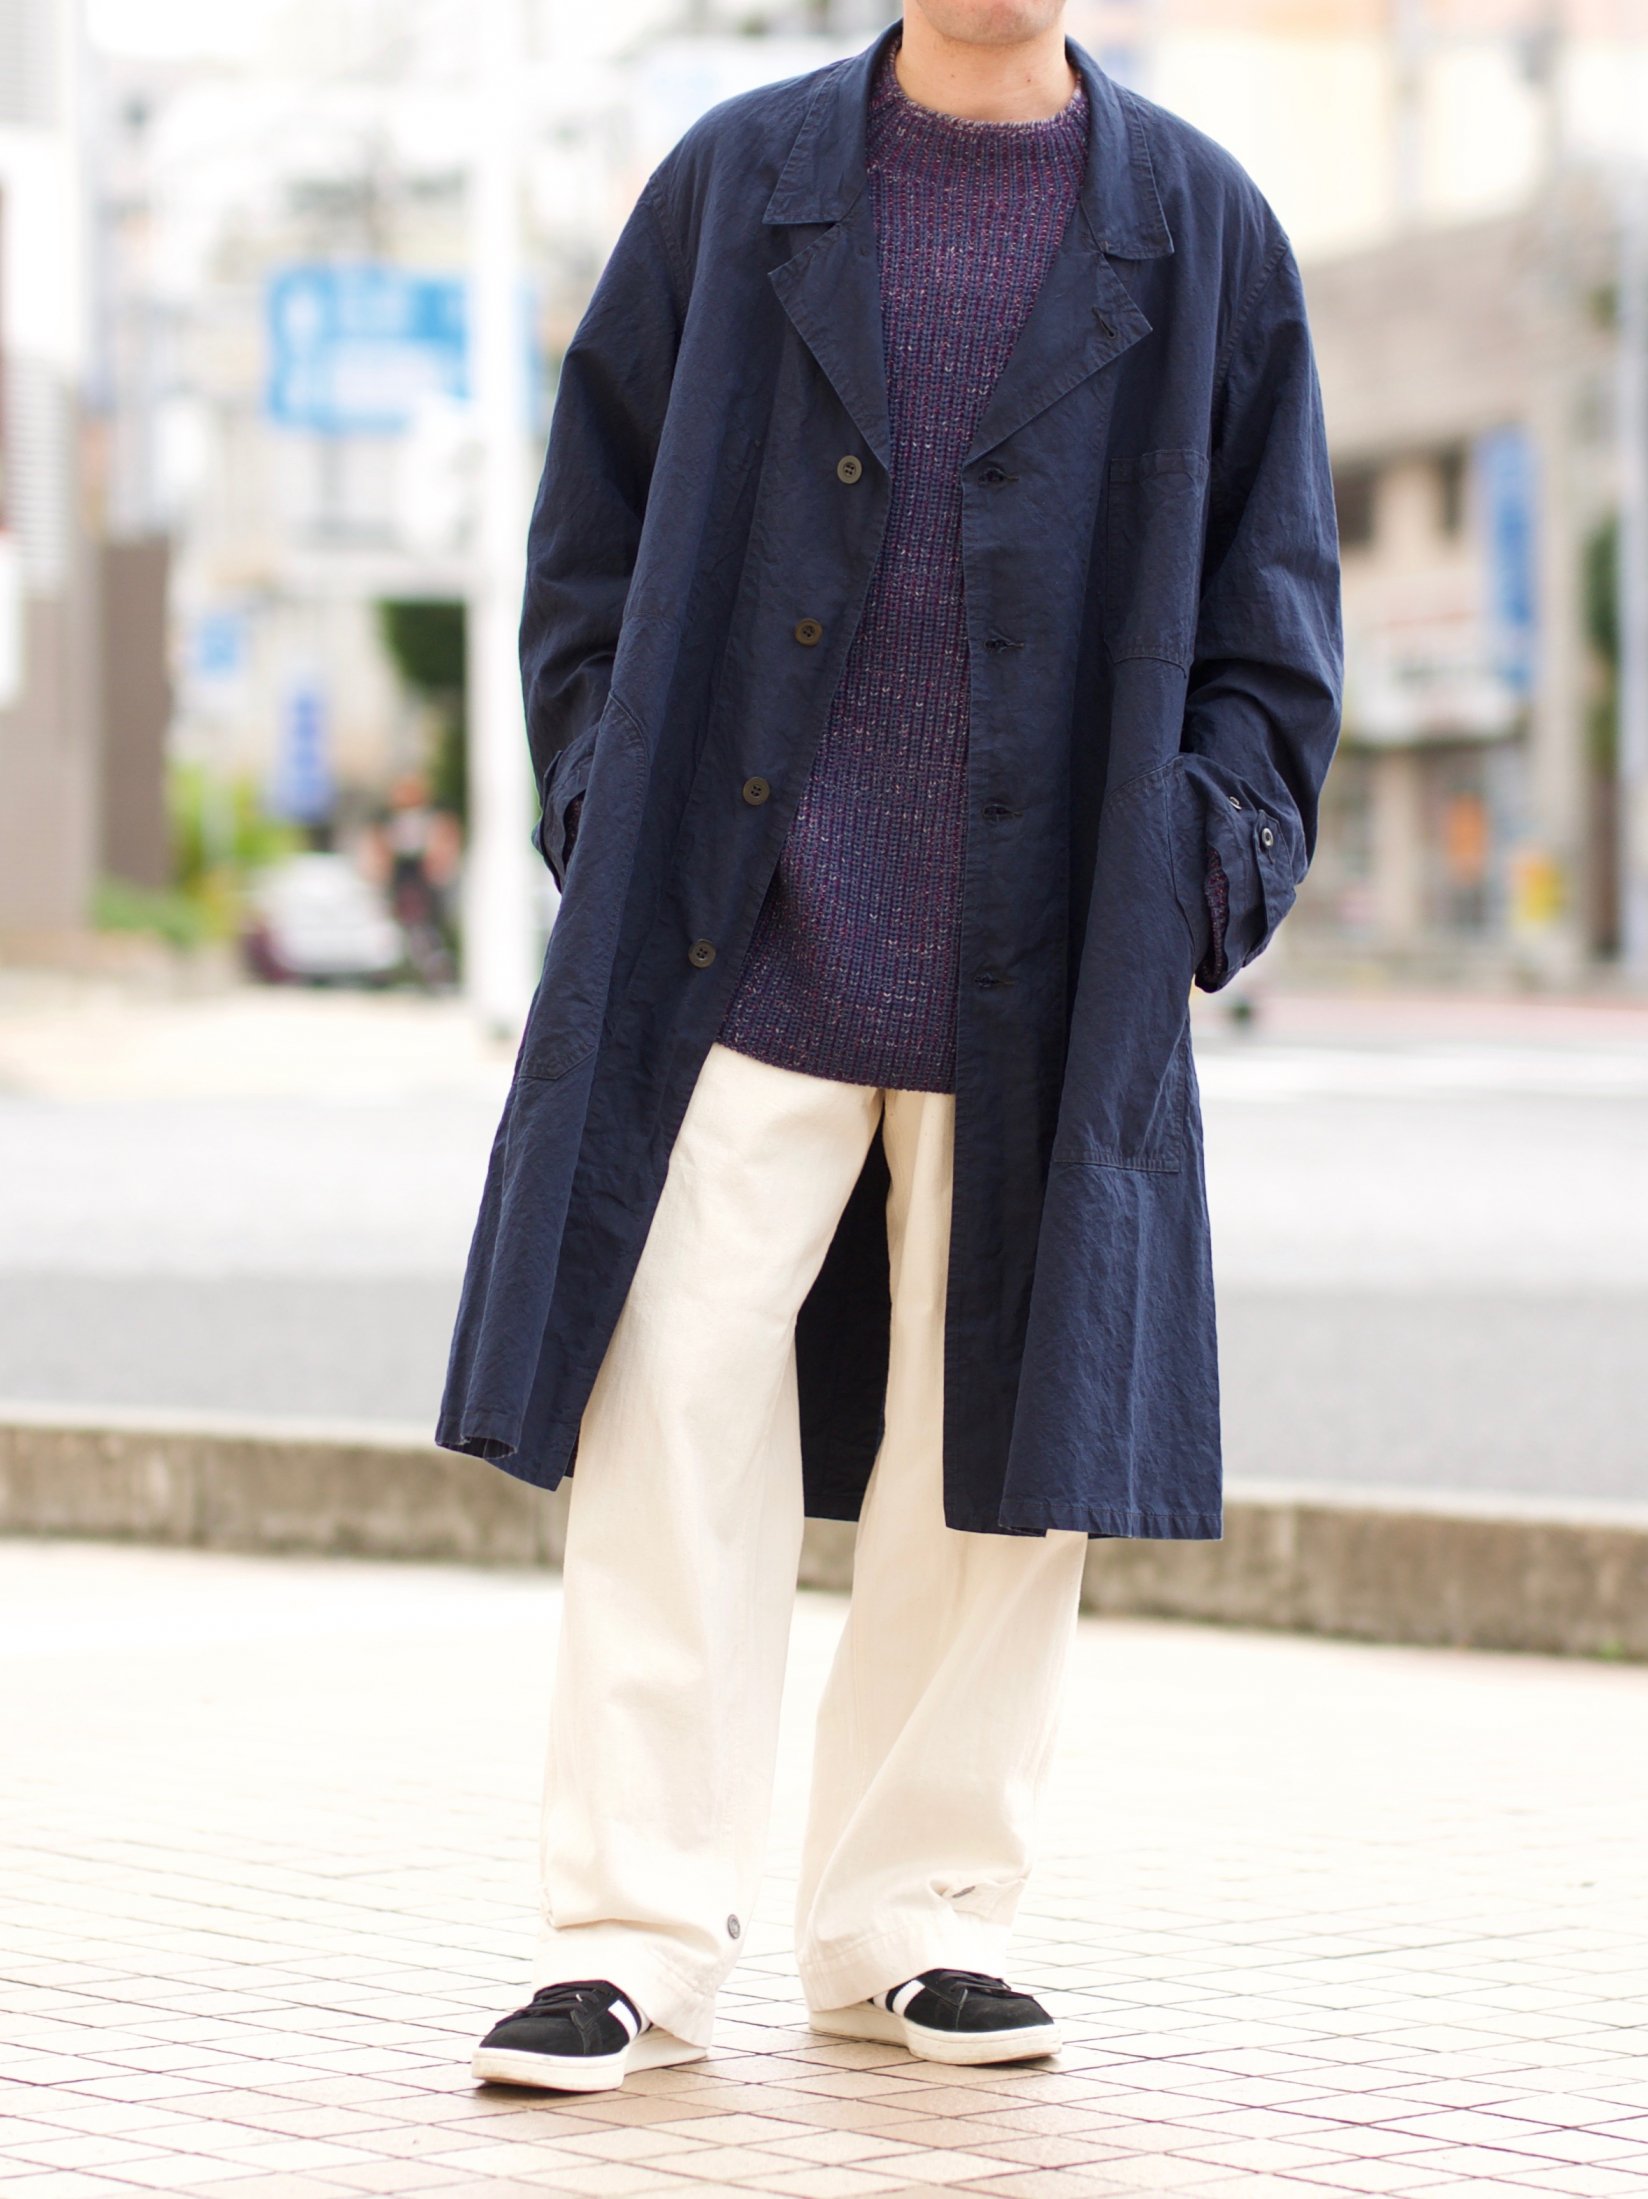 OUTIL [ウティ] 21AW Manteau Aze Charcoal-